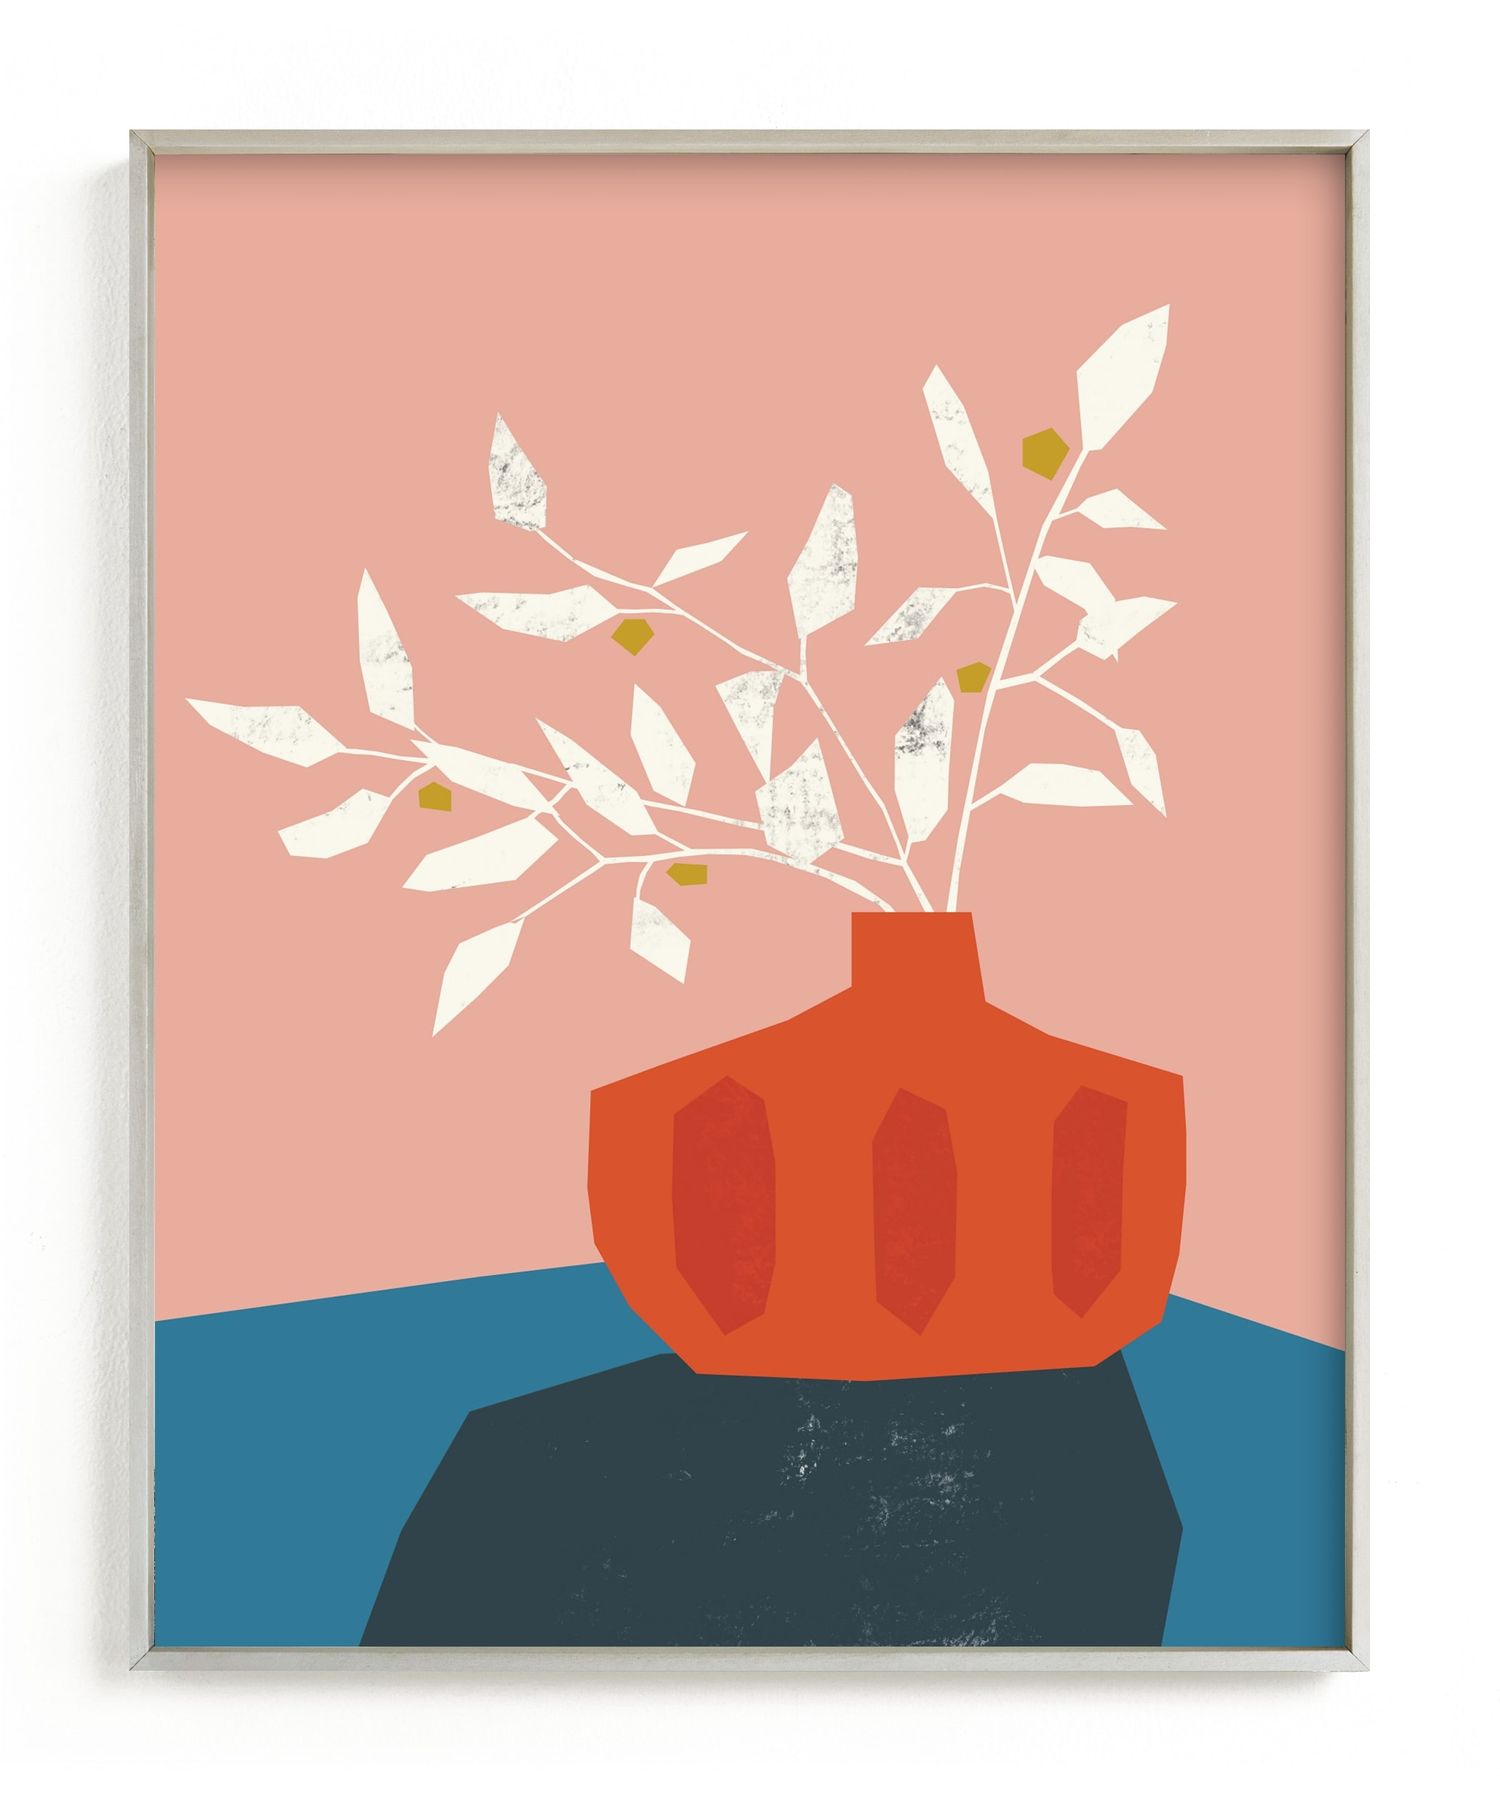 Shop Mid Century Vase (16x20), Gilded Wood Frame from Minted on Openhaus